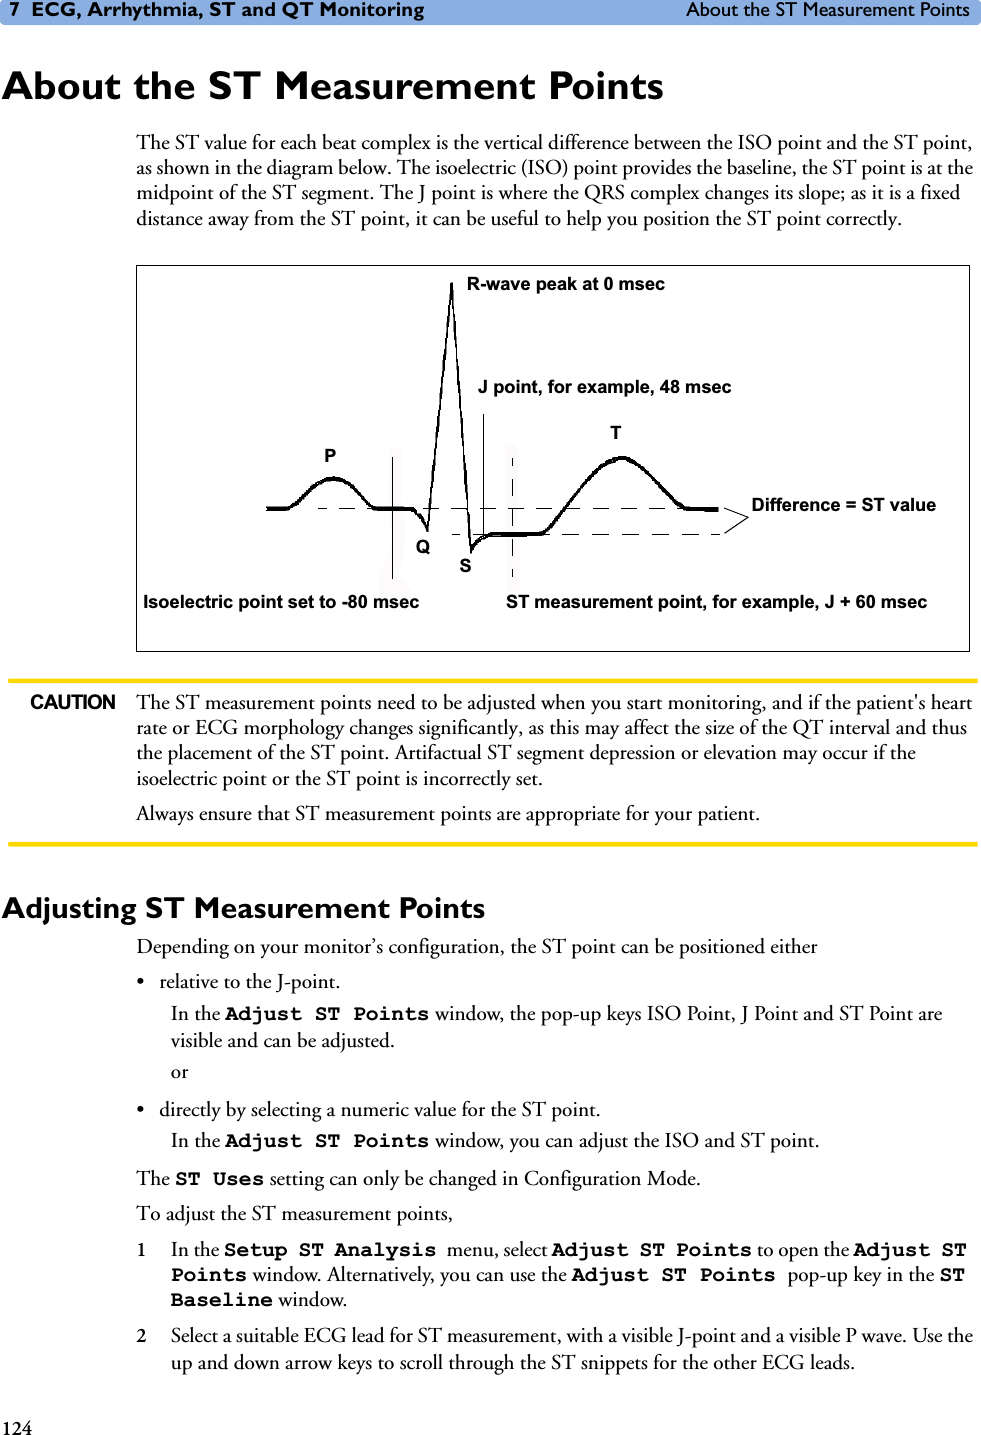 7 ECG, Arrhythmia, ST and QT Monitoring About the ST Measurement Points124About the ST Measurement PointsThe ST value for each beat complex is the vertical difference between the ISO point and the ST point, as shown in the diagram below. The isoelectric (ISO) point provides the baseline, the ST point is at the midpoint of the ST segment. The J point is where the QRS complex changes its slope; as it is a fixed distance away from the ST point, it can be useful to help you position the ST point correctly. CAUTION The ST measurement points need to be adjusted when you start monitoring, and if the patient&apos;s heart rate or ECG morphology changes significantly, as this may affect the size of the QT interval and thus the placement of the ST point. Artifactual ST segment depression or elevation may occur if the isoelectric point or the ST point is incorrectly set. Always ensure that ST measurement points are appropriate for your patient.Adjusting ST Measurement PointsDepending on your monitor’s configuration, the ST point can be positioned either • relative to the J-point. In the Adjust ST Points window, the pop-up keys ISO Point, J Point and ST Point are visible and can be adjusted. or• directly by selecting a numeric value for the ST point. In the Adjust ST Points window, you can adjust the ISO and ST point. The ST Uses setting can only be changed in Configuration Mode. To adjust the ST measurement points, 1In the Setup ST Analysis menu, select Adjust ST Points to open the Adjust ST Points window. Alternatively, you can use the Adjust ST Points pop-up key in the ST Baseline window.2Select a suitable ECG lead for ST measurement, with a visible J-point and a visible P wave. Use the up and down arrow keys to scroll through the ST snippets for the other ECG leads. J point, for example, 48 msecR-wave peak at 0 msecIsoelectric point set to -80 msecDifference = ST valueST measurement point, for example, J + 60 msecTPQS